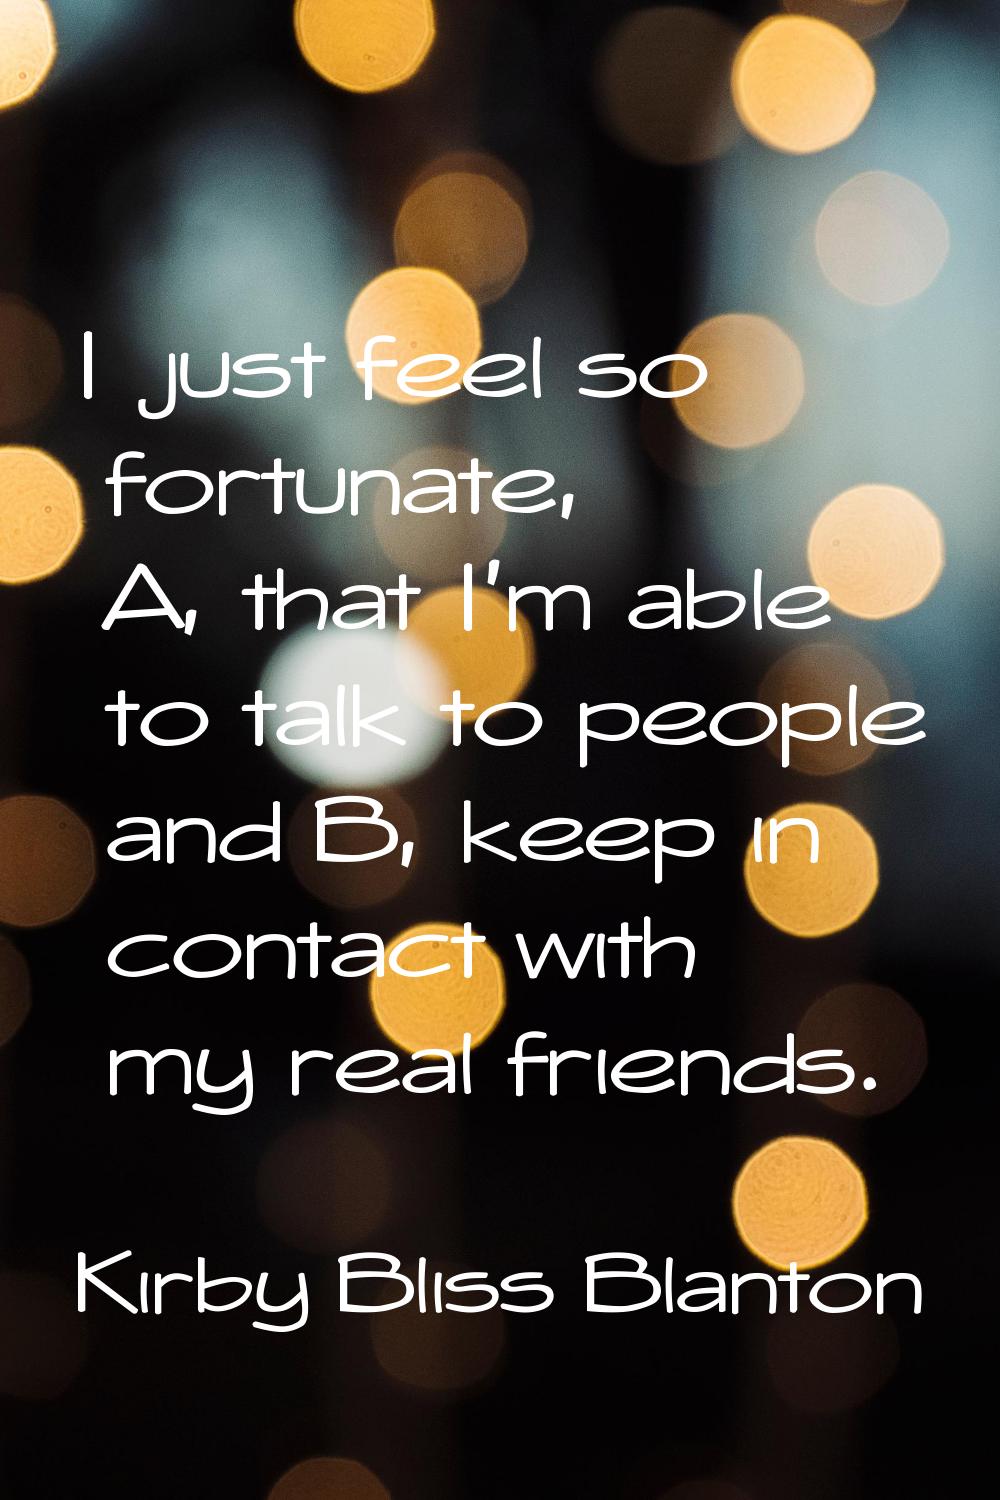 I just feel so fortunate, A, that I'm able to talk to people and B, keep in contact with my real fr